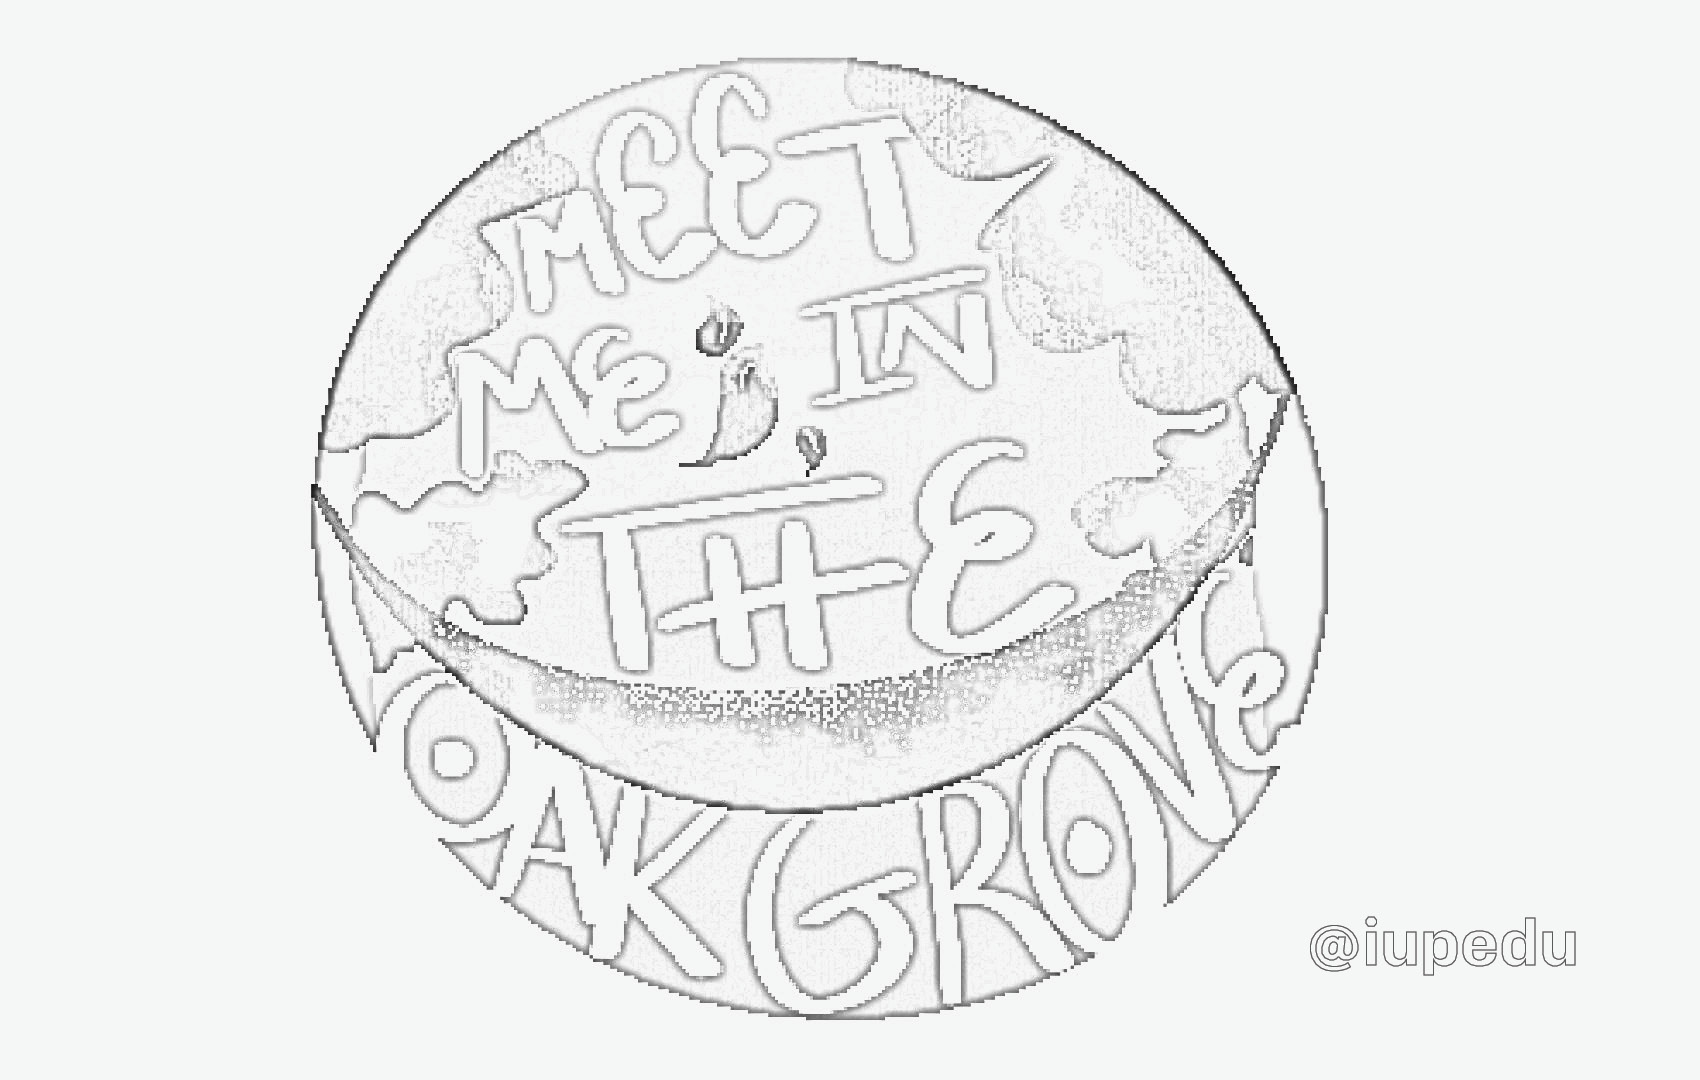 Coloring page with the words Meet me in the oak grove